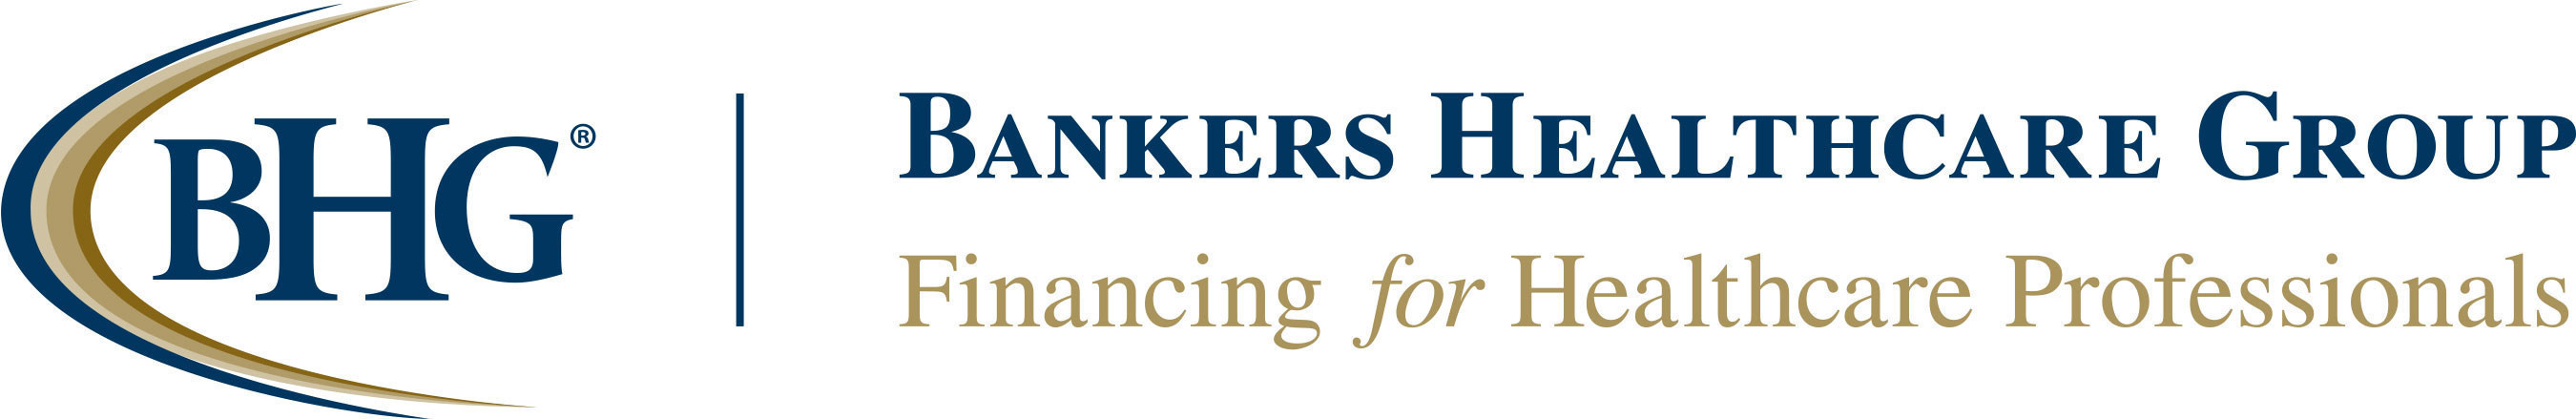 Bankers Healthcare Group, a leading provider of financing solutions for healthcare professionals since 2001.